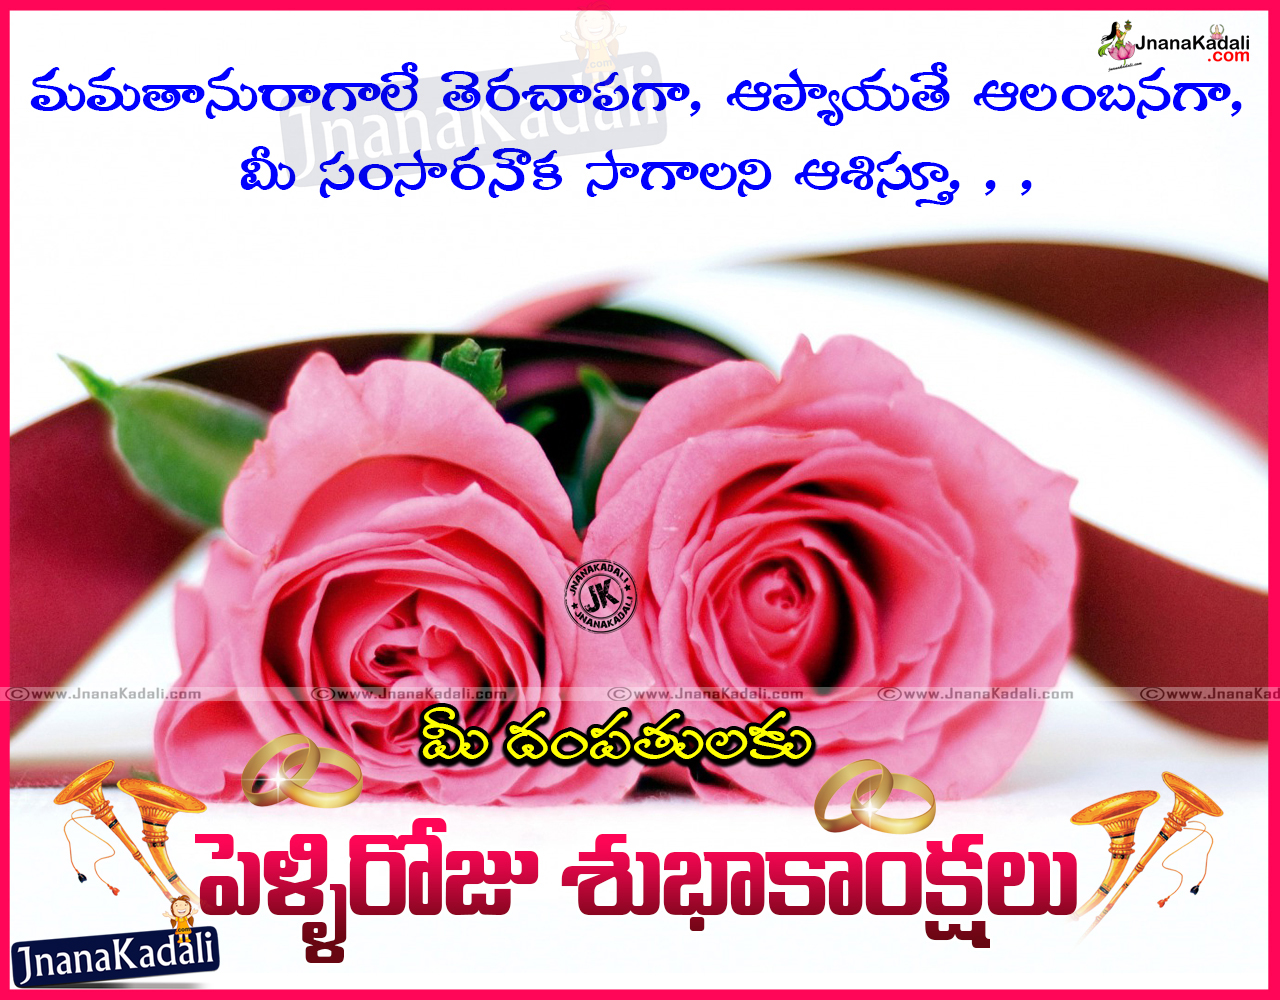 Telugu Marriage Day Quotes | Marriage Day Greetings in Telugu ...